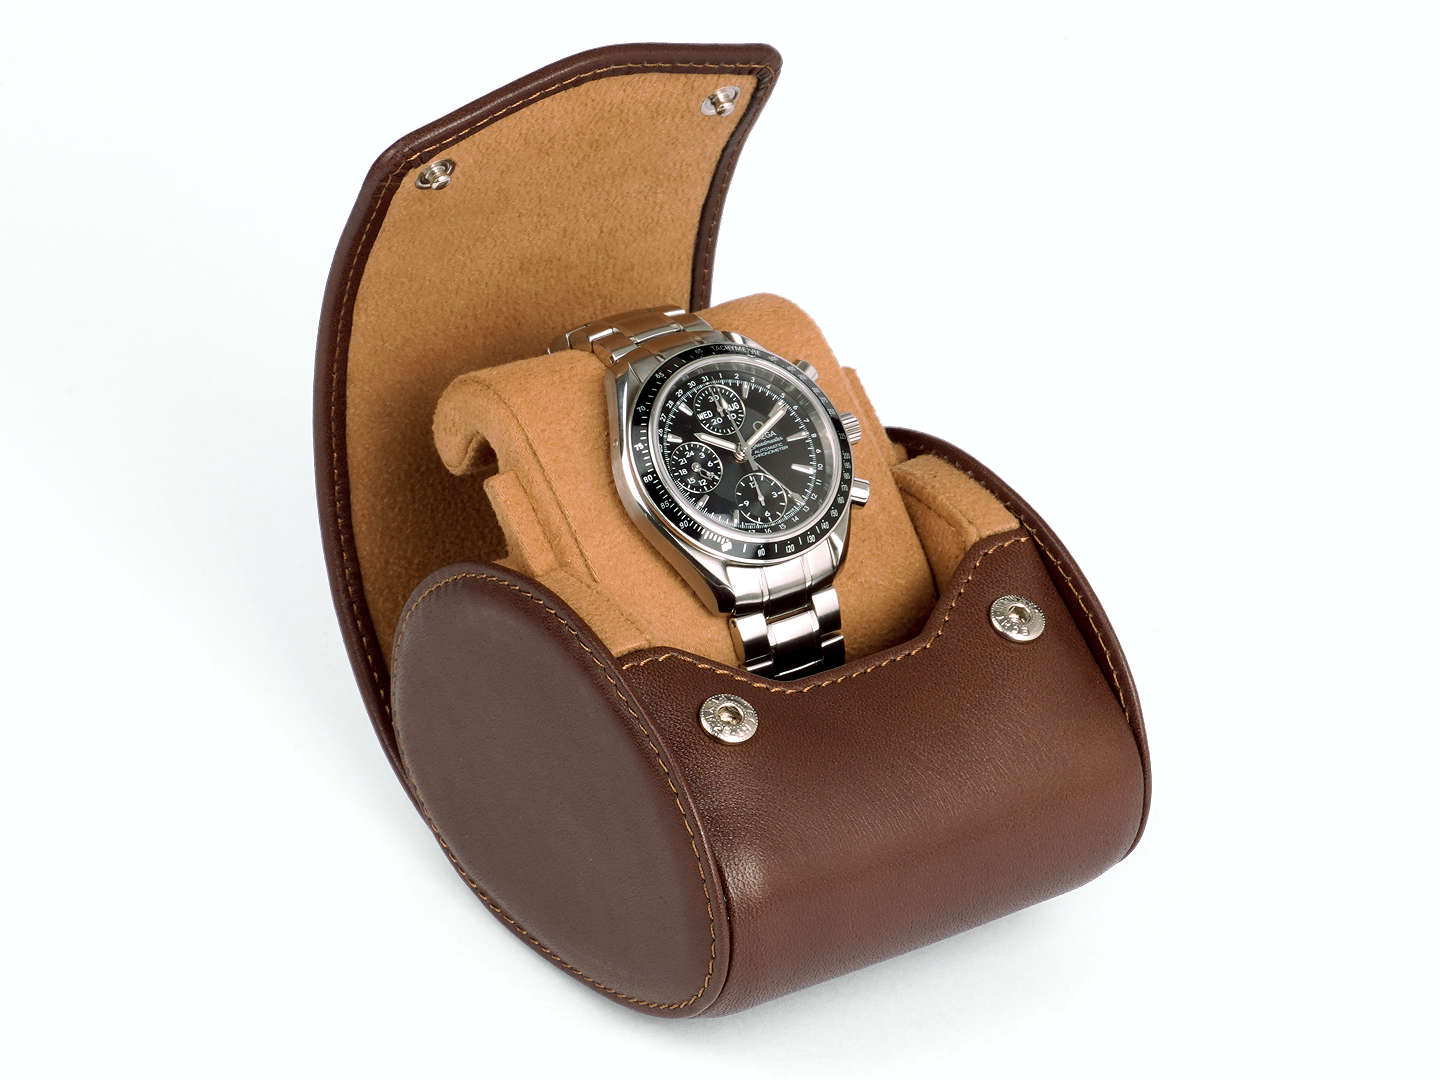 1_Watch_Travel_Watch_Tobacco_Brown_Leather_closed_1_Carapaz